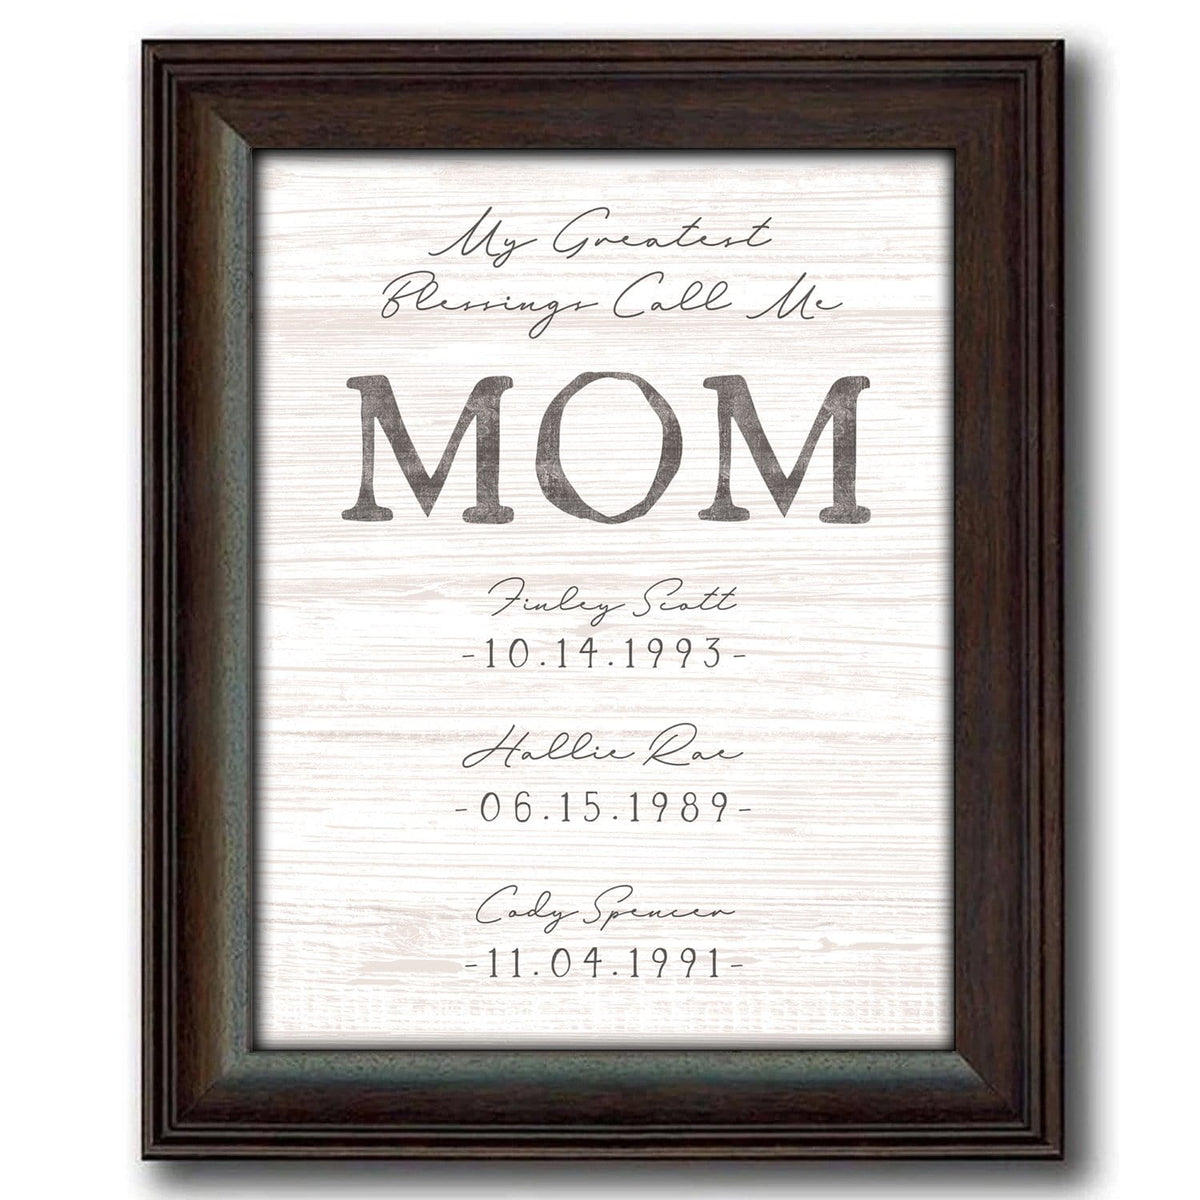 Personalized Christmas Gifts for Mom, Mother Daughter Gifts, Birthday,  Anniversary: My Greatest Blessings Call Me MOM, Burlap Print - MOM CAN BE